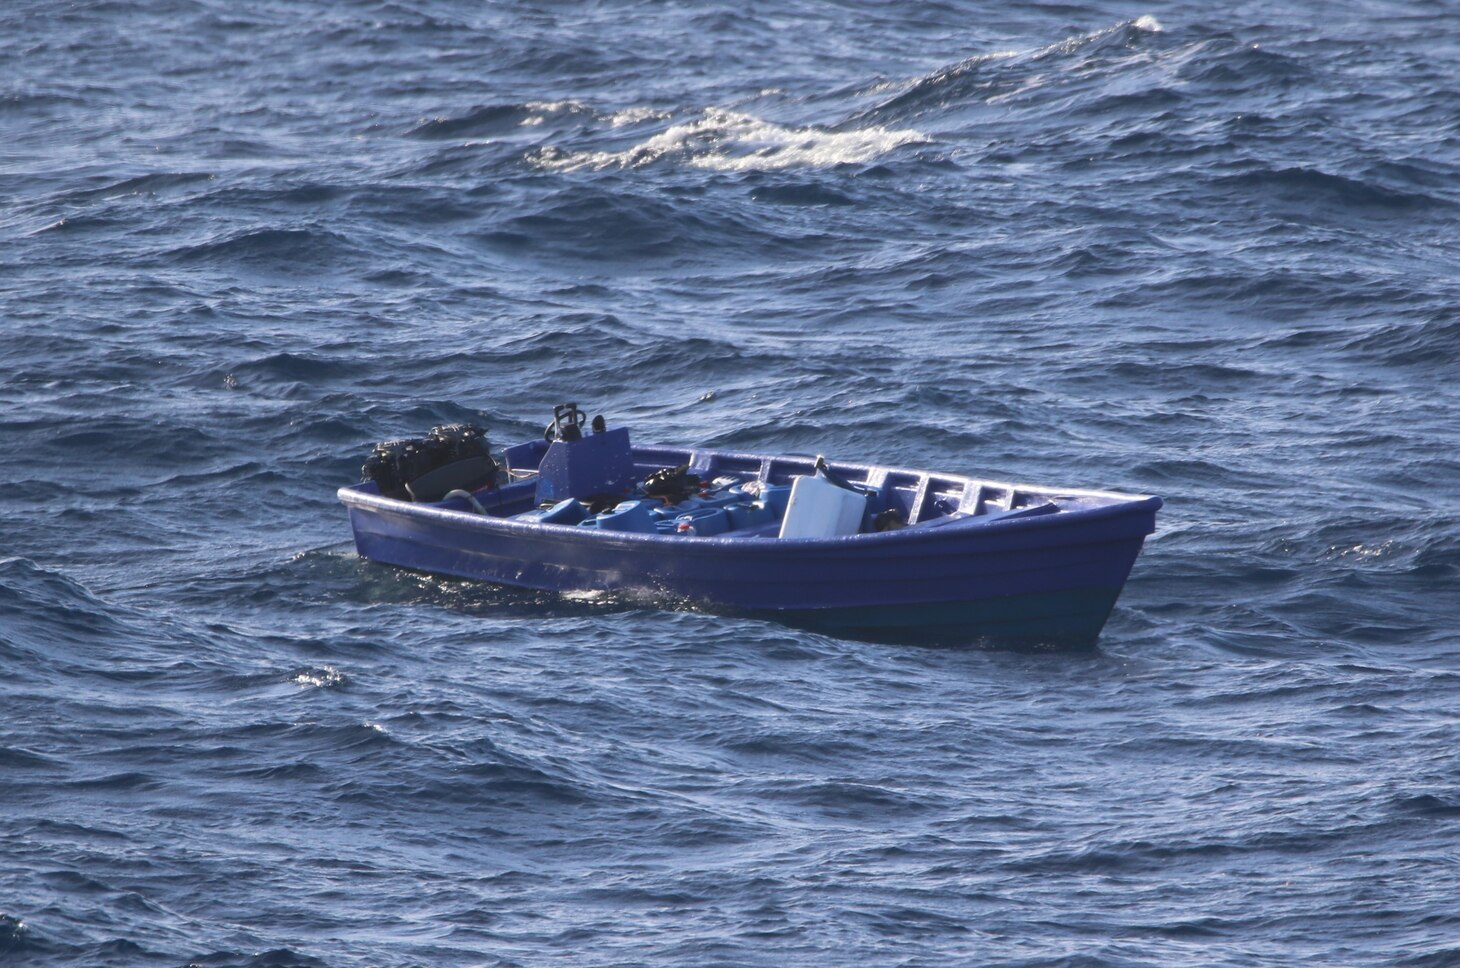 The Freedom-variant littoral combat ship USS Wichita (LCS 13), with embarked U.S. Coast Guard (USCG) Law Enforcement Detachment (LEDET) 402, intercepts a suspect go fast vessel during  counter-narcotics operations.